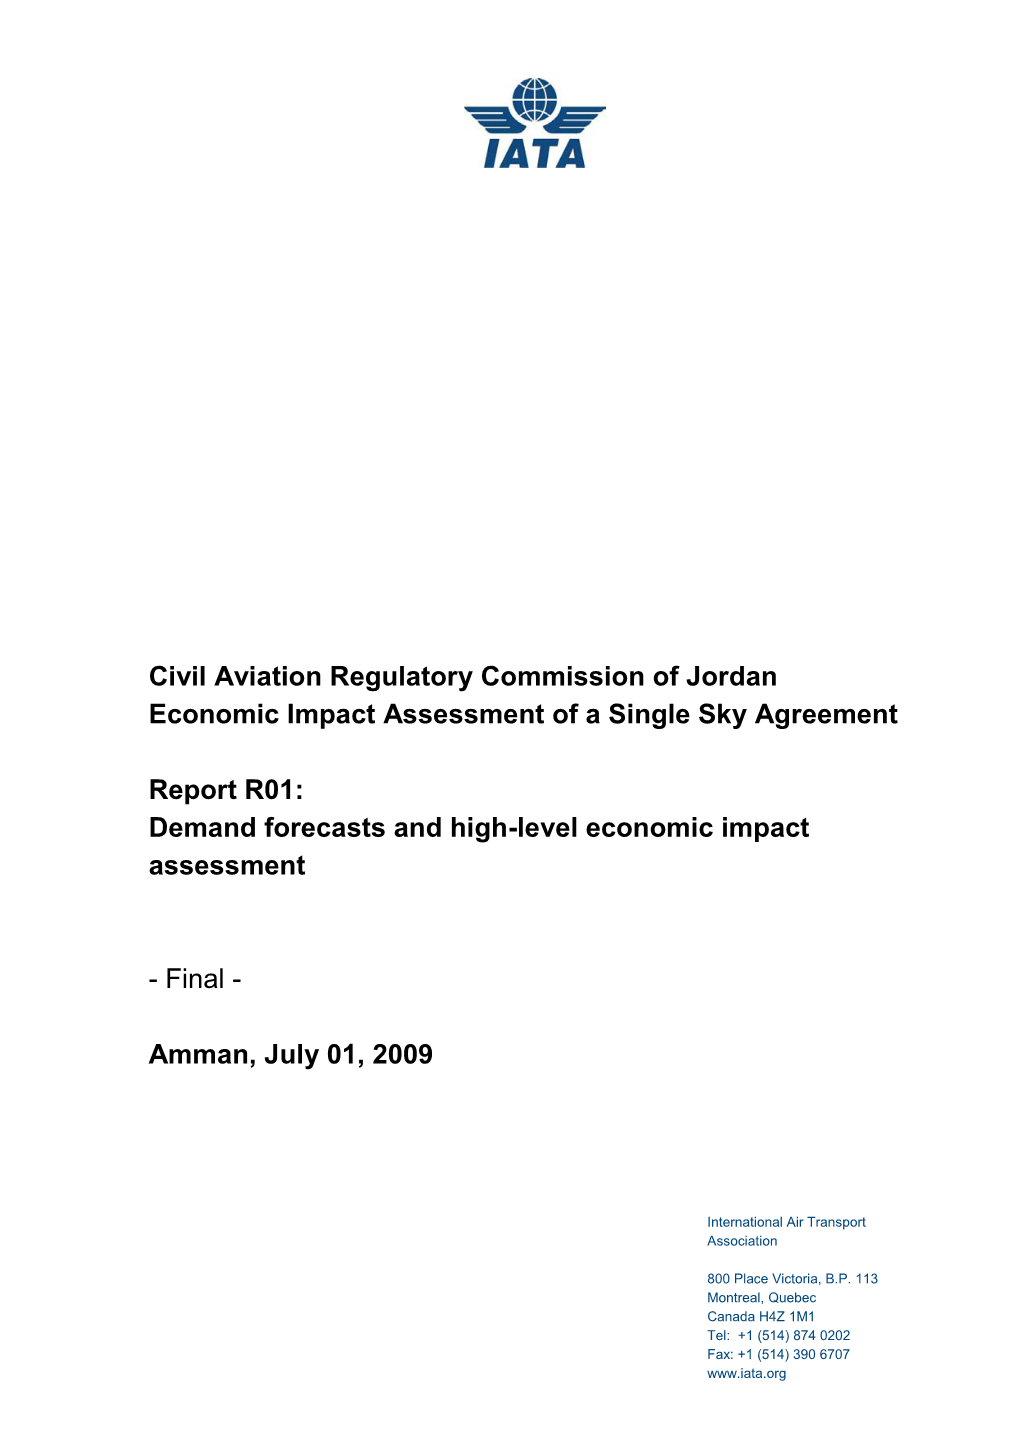 Economic Impact Assessment of a Single Sky Agreement